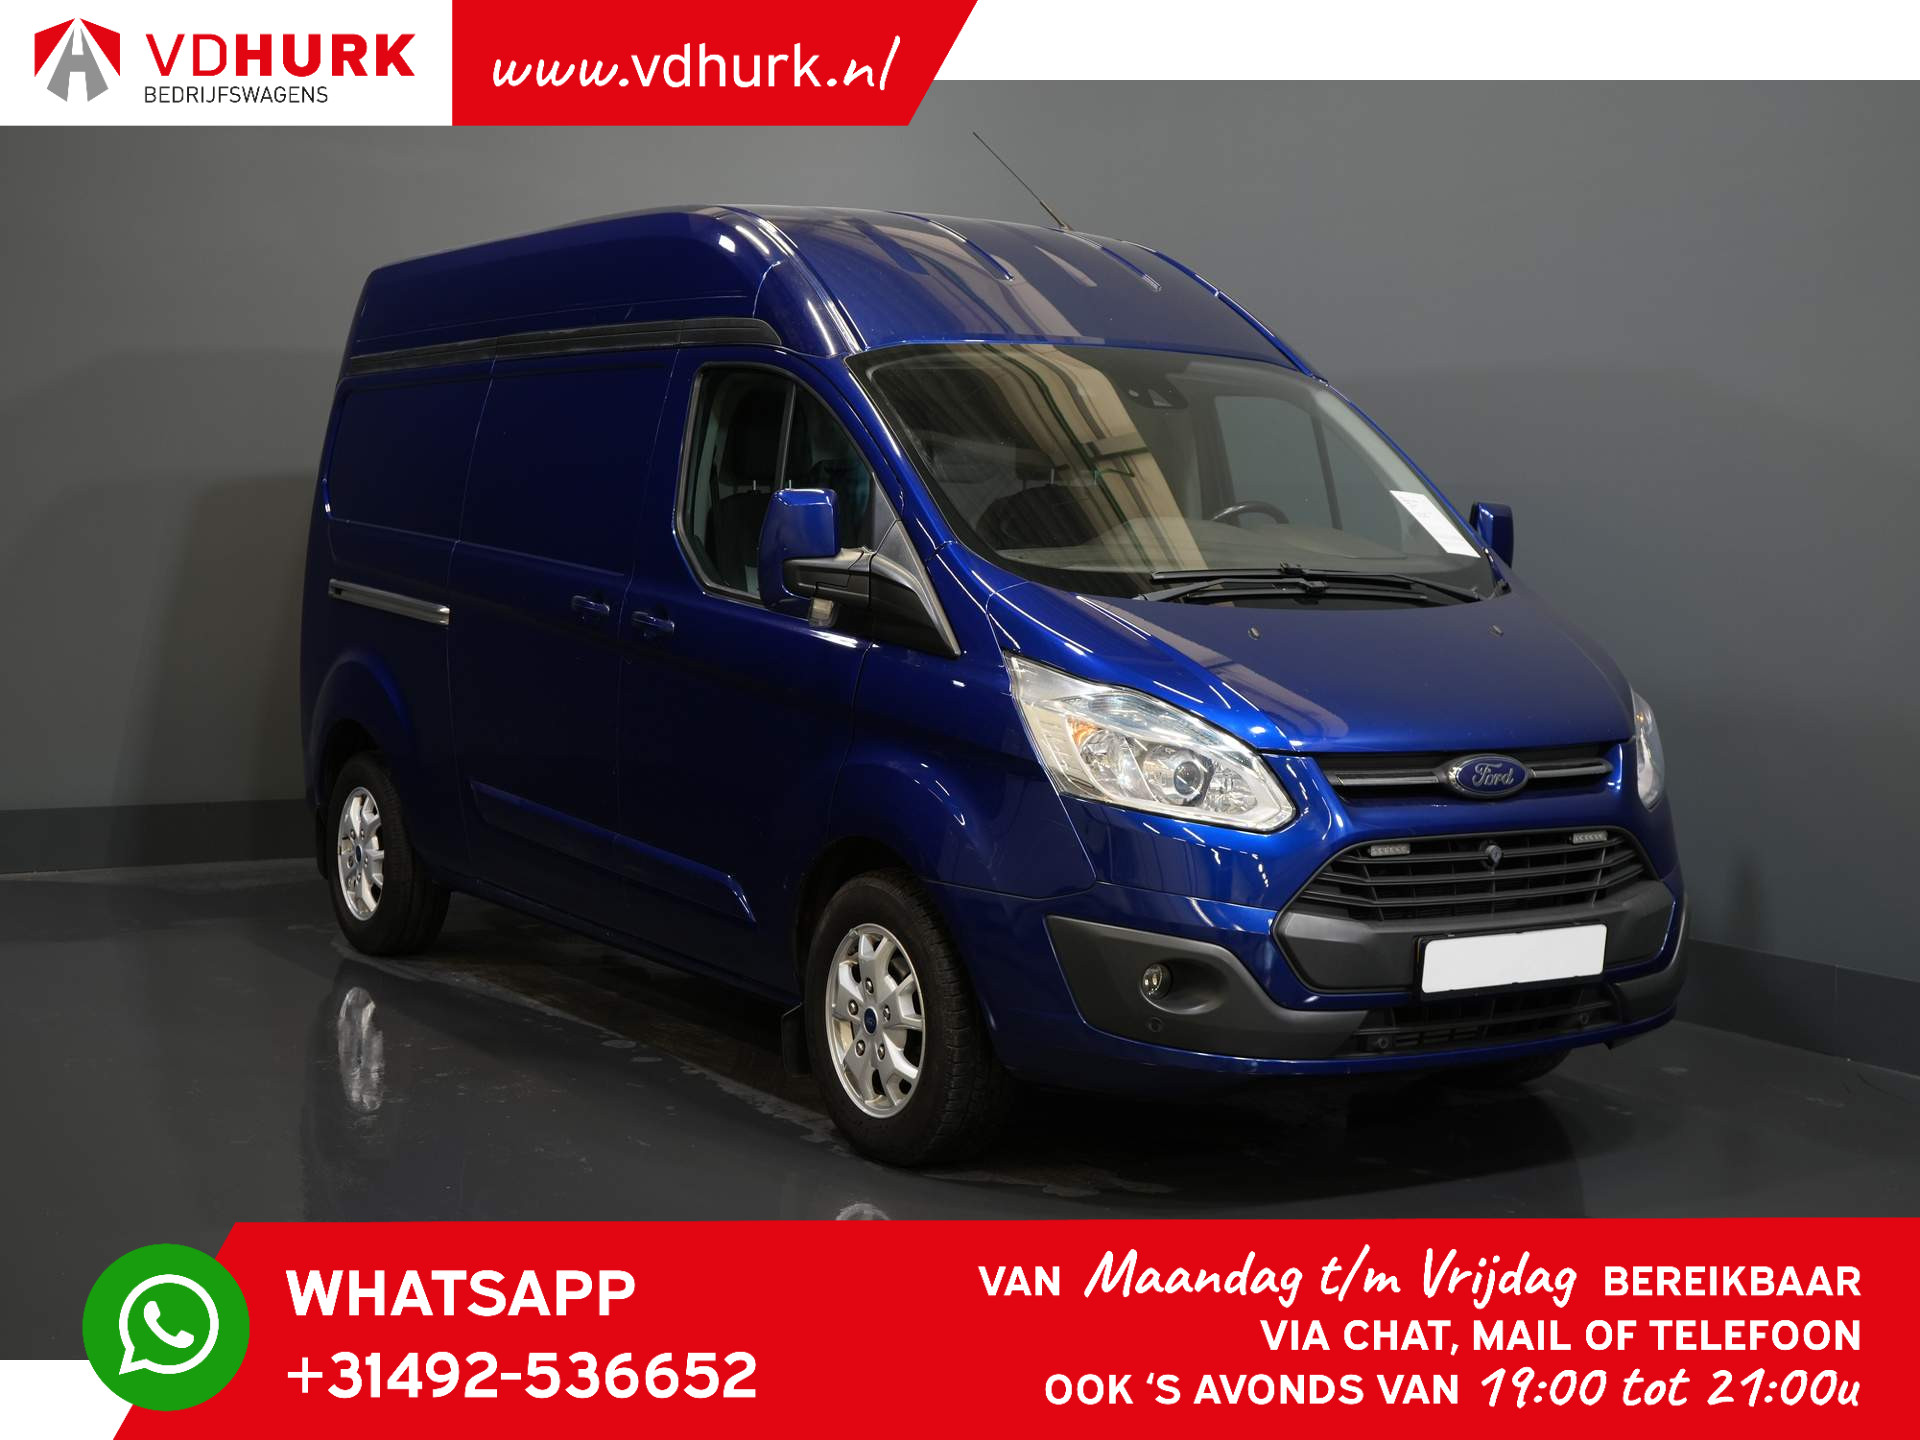 Ford Transit Custom 2.2 TDCI 155 pk L2H2 Limited Inrichting/ Stoelverw./ Cruise/ Camera/ 2.8t Trekverm./ BUSCAMPER?